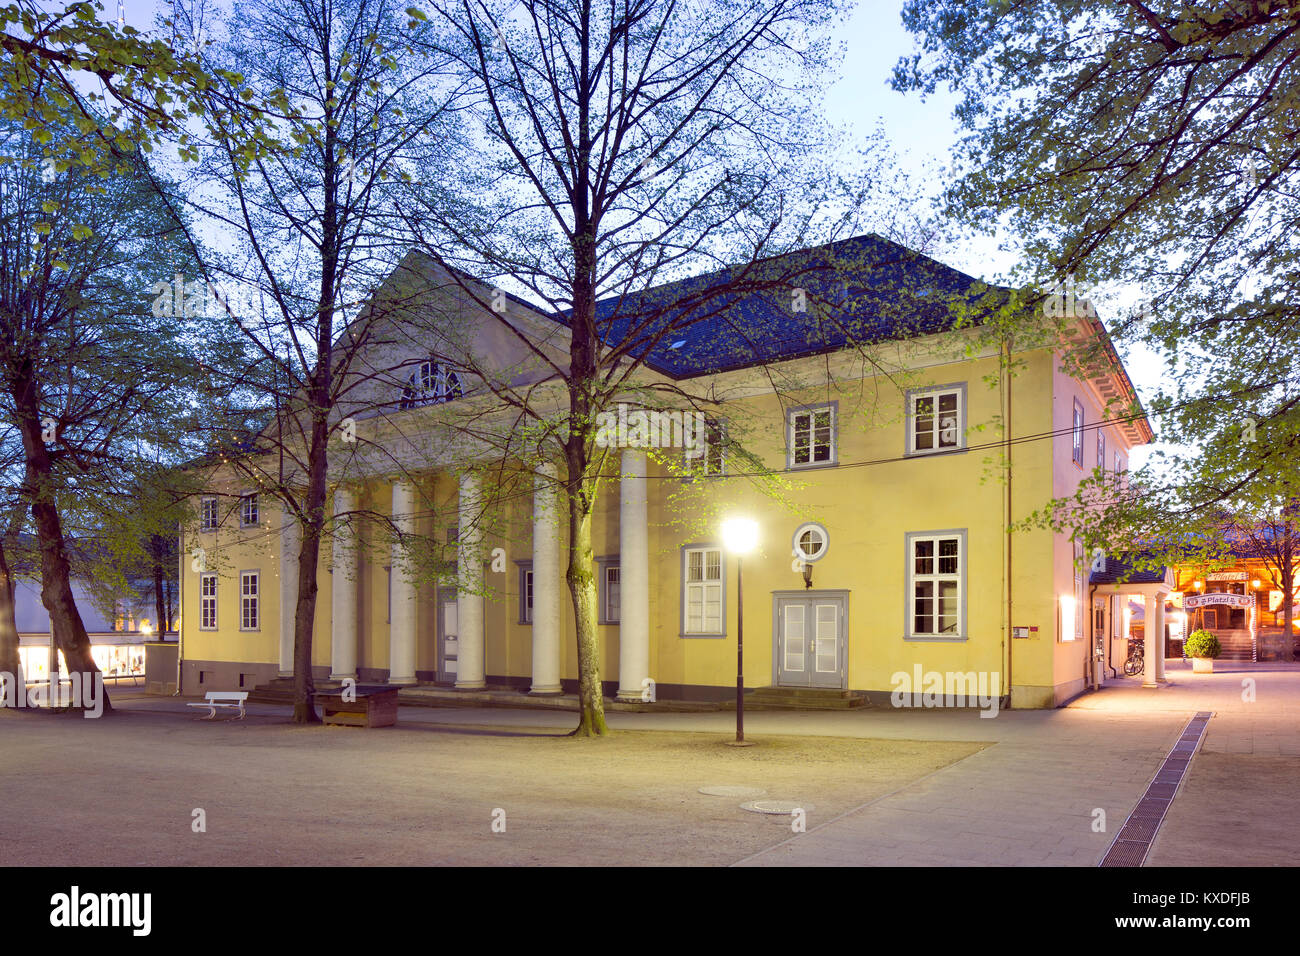 Kurtheater,theatre in the spa district,Bad Pyrmont,Lower Saxony,Germany Stock Photo